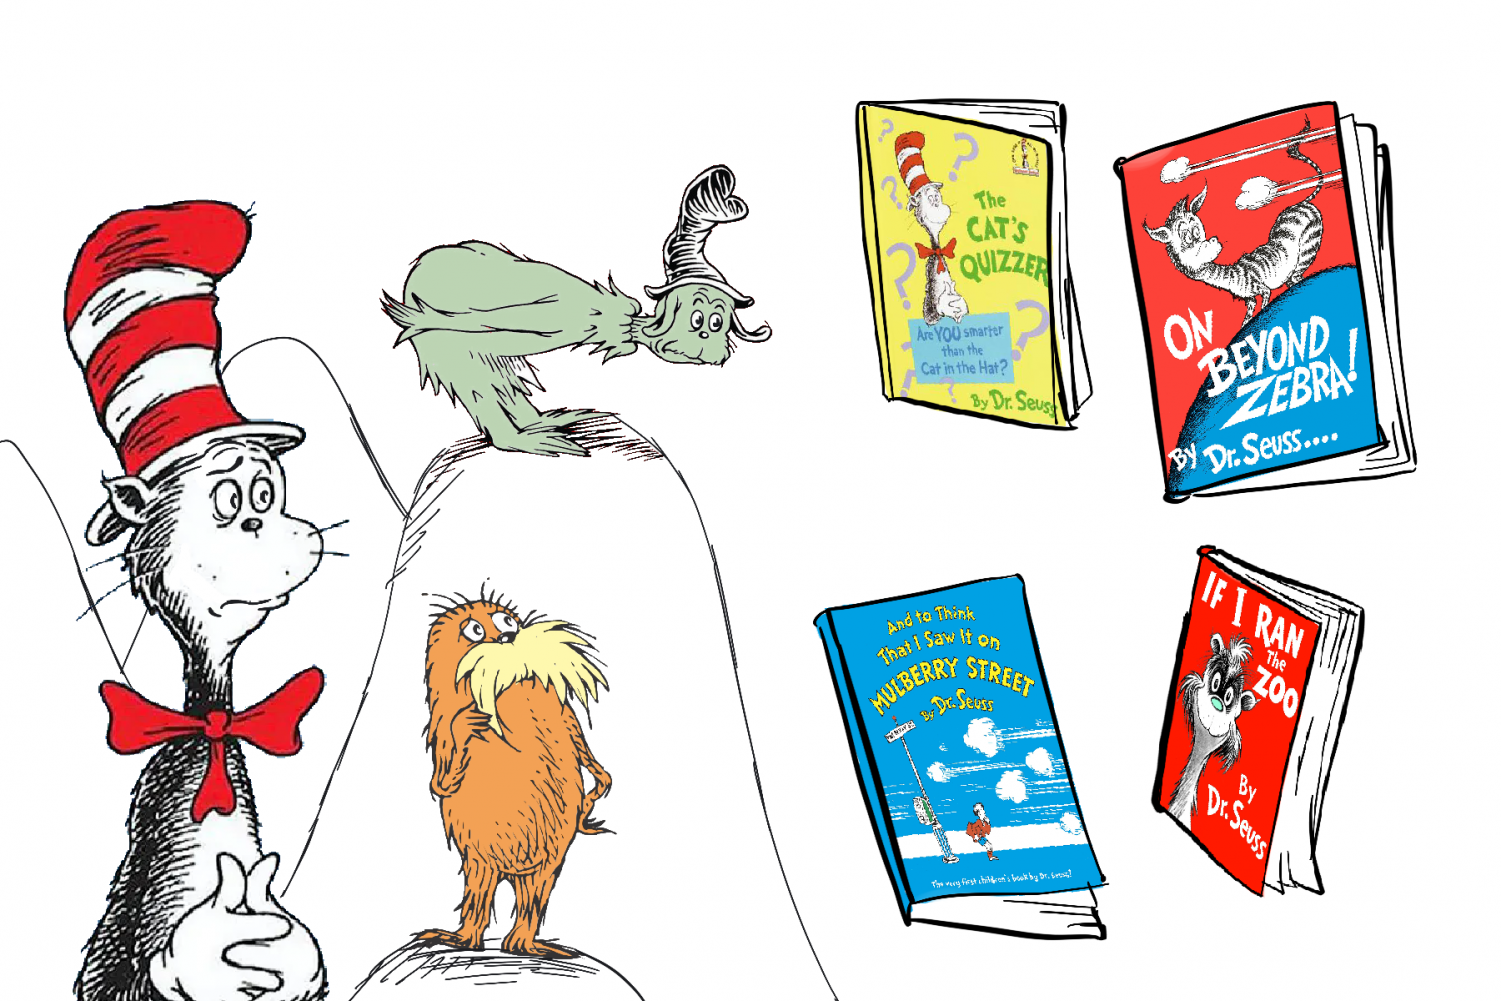 Dr. Seuss Pulled from Publishing – The Garfield Messenger